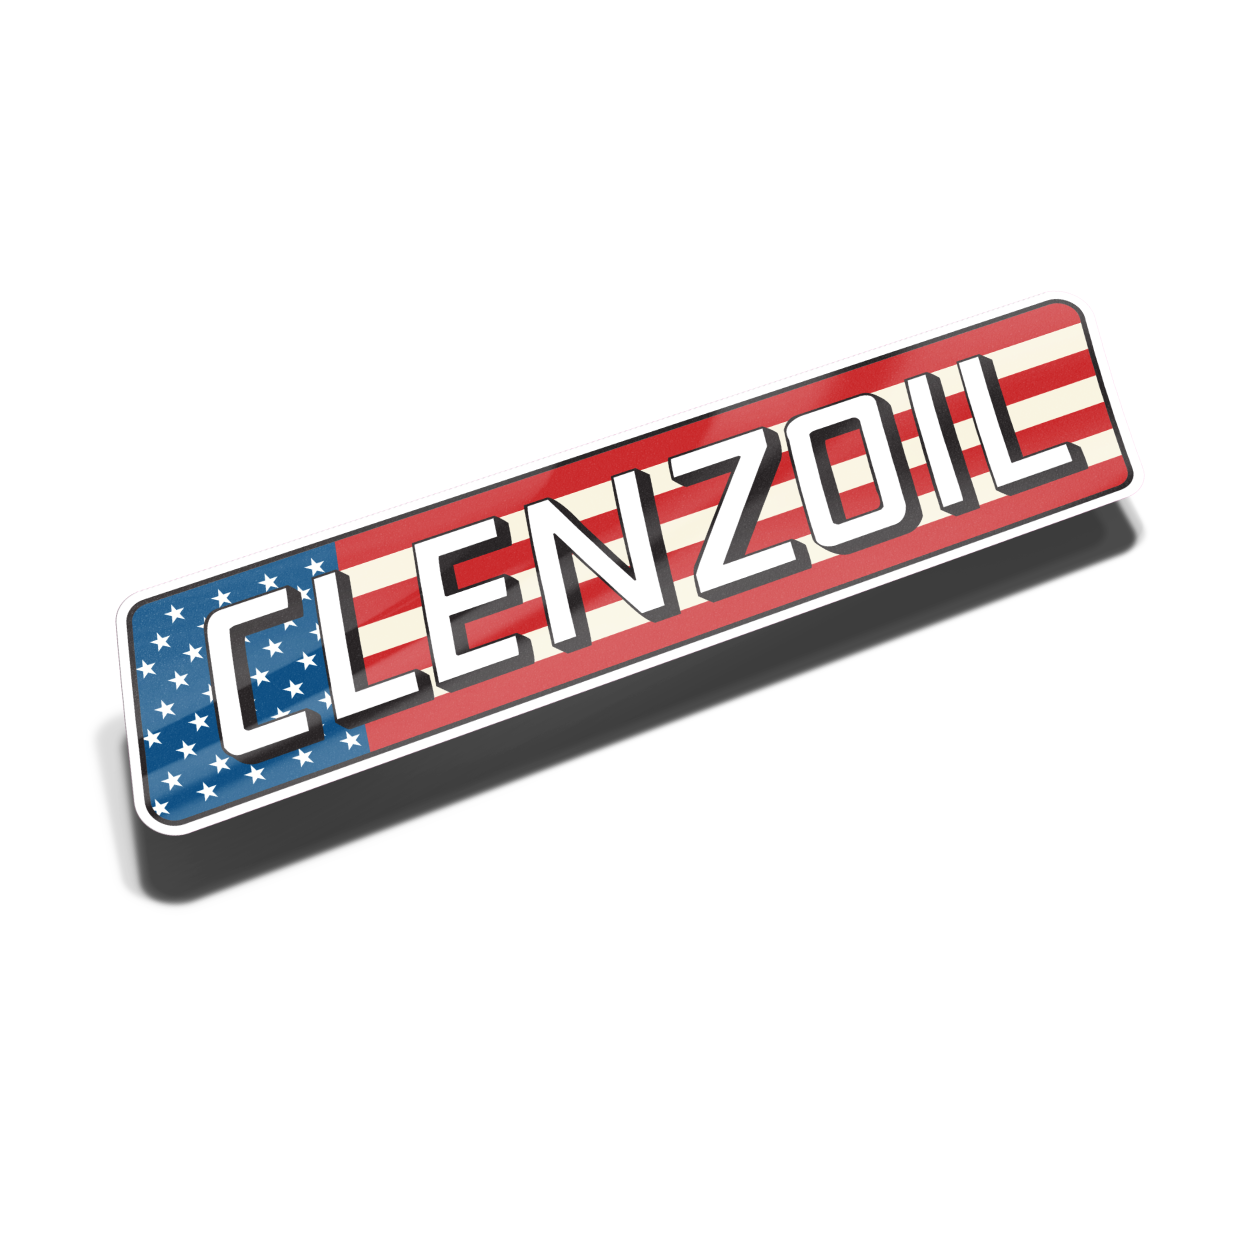 Clenzoil Decal Pack